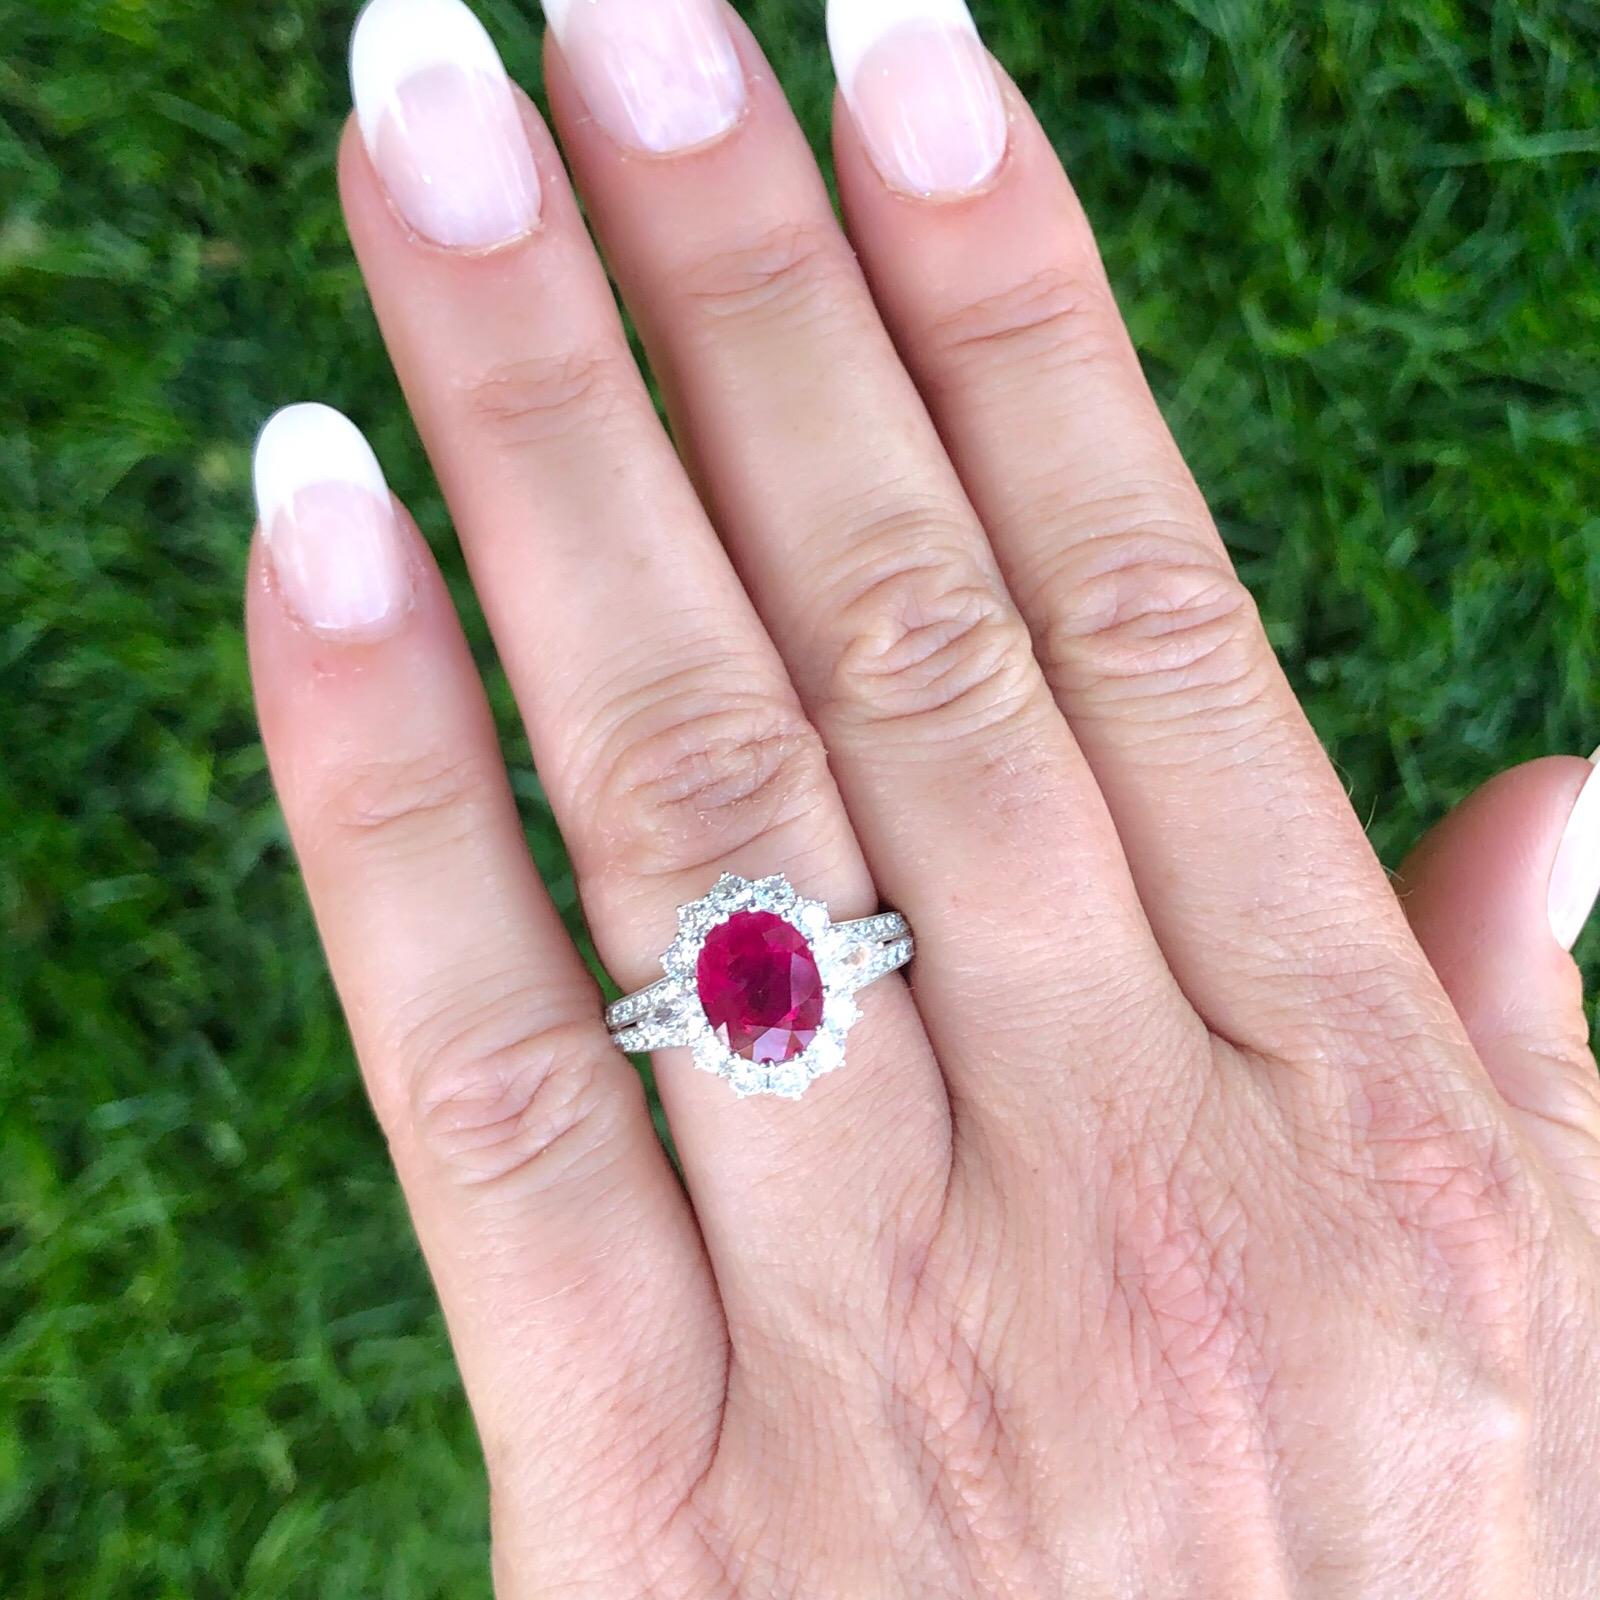 Burmese rubies are sought after for their beautiful red tones. This 18k white gold ring featuring a 3.06 carat oval-shaped ruby is a great example of the Burmese allure - deep red tones with the slightest hint of pink. Flanked by fancy-cut diamonds